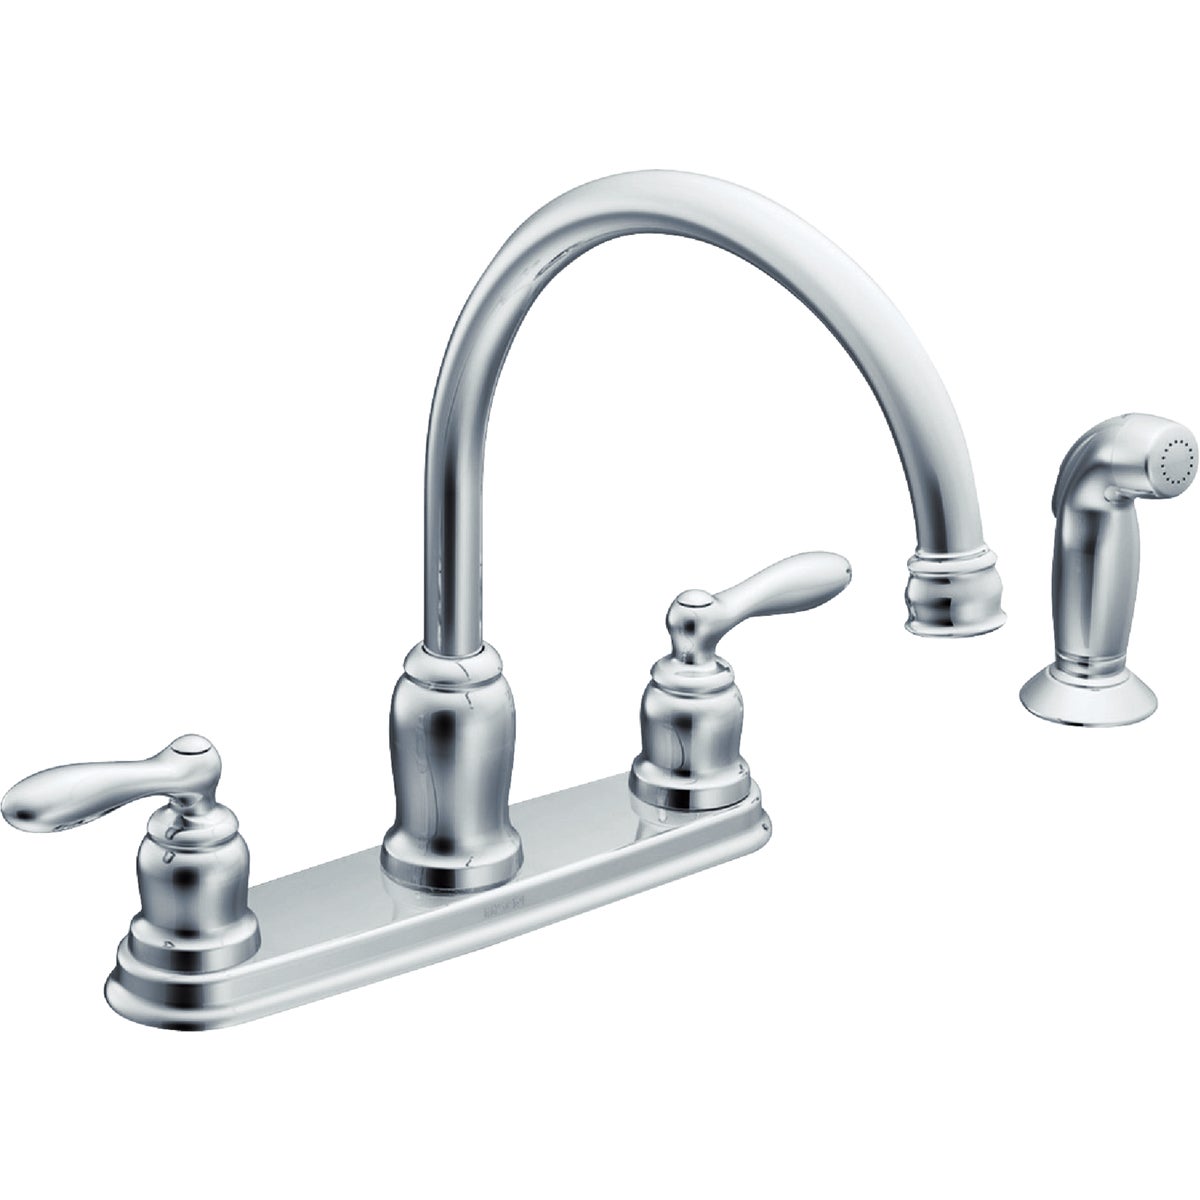 Item 459809, Moen's Caldwell collection offers homeowners classic styling with soft 